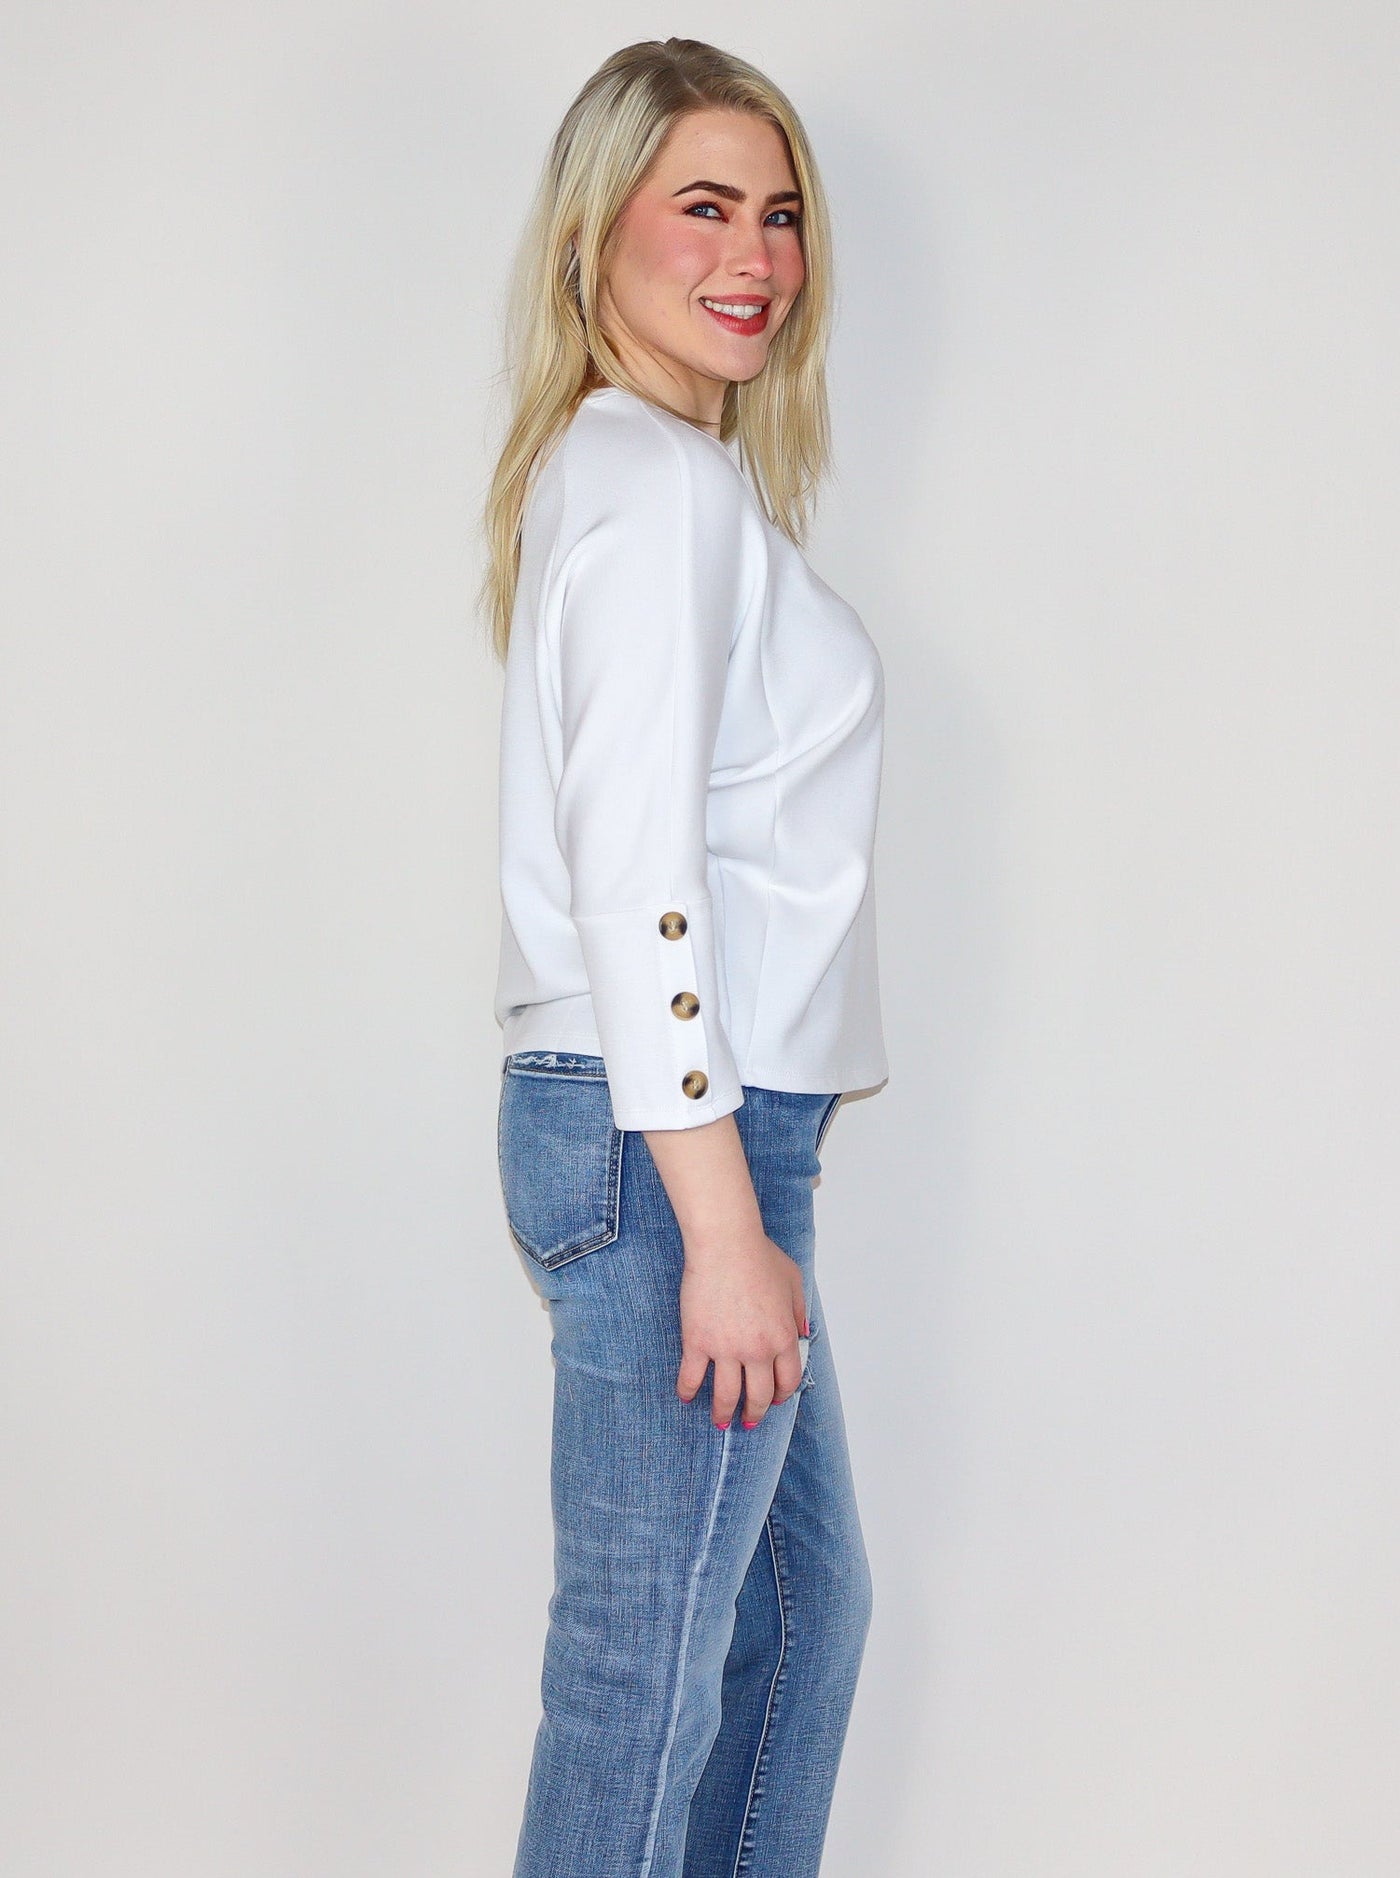 Model is wearing a white 3/4th sleeve top with 3 brown buttons on each sleeve. Top is worn with blue jeans.